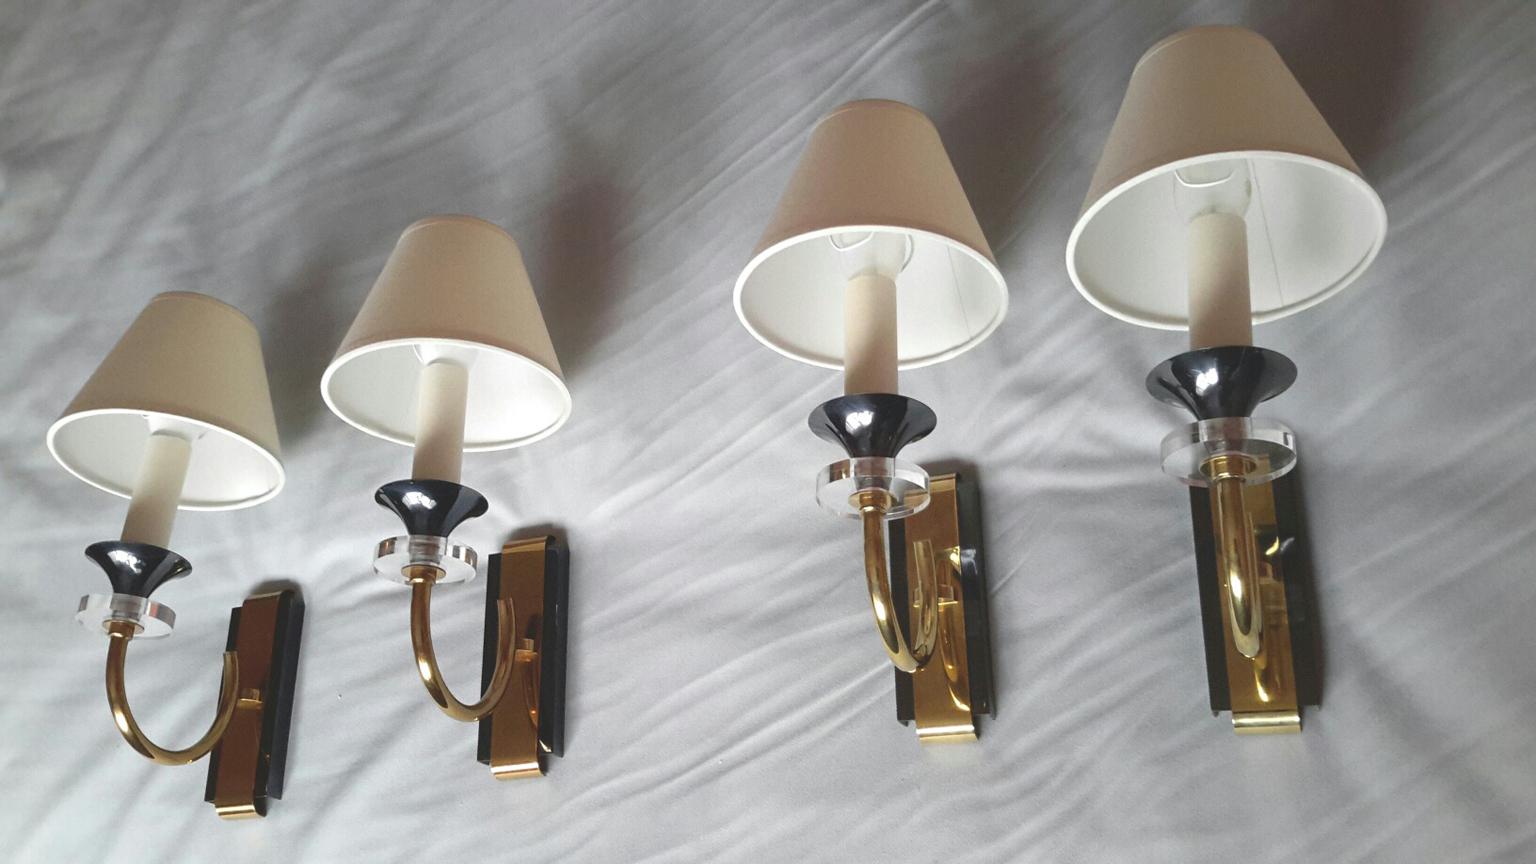 Beautiful 2 pairs of one arm gilt bronze sconces in neoclassical style, French, 1950s by Maison Jansen presenting a contrast of two different patinas in gilt bronze and gun metal with charming details of clear discs of Lucite glass under each